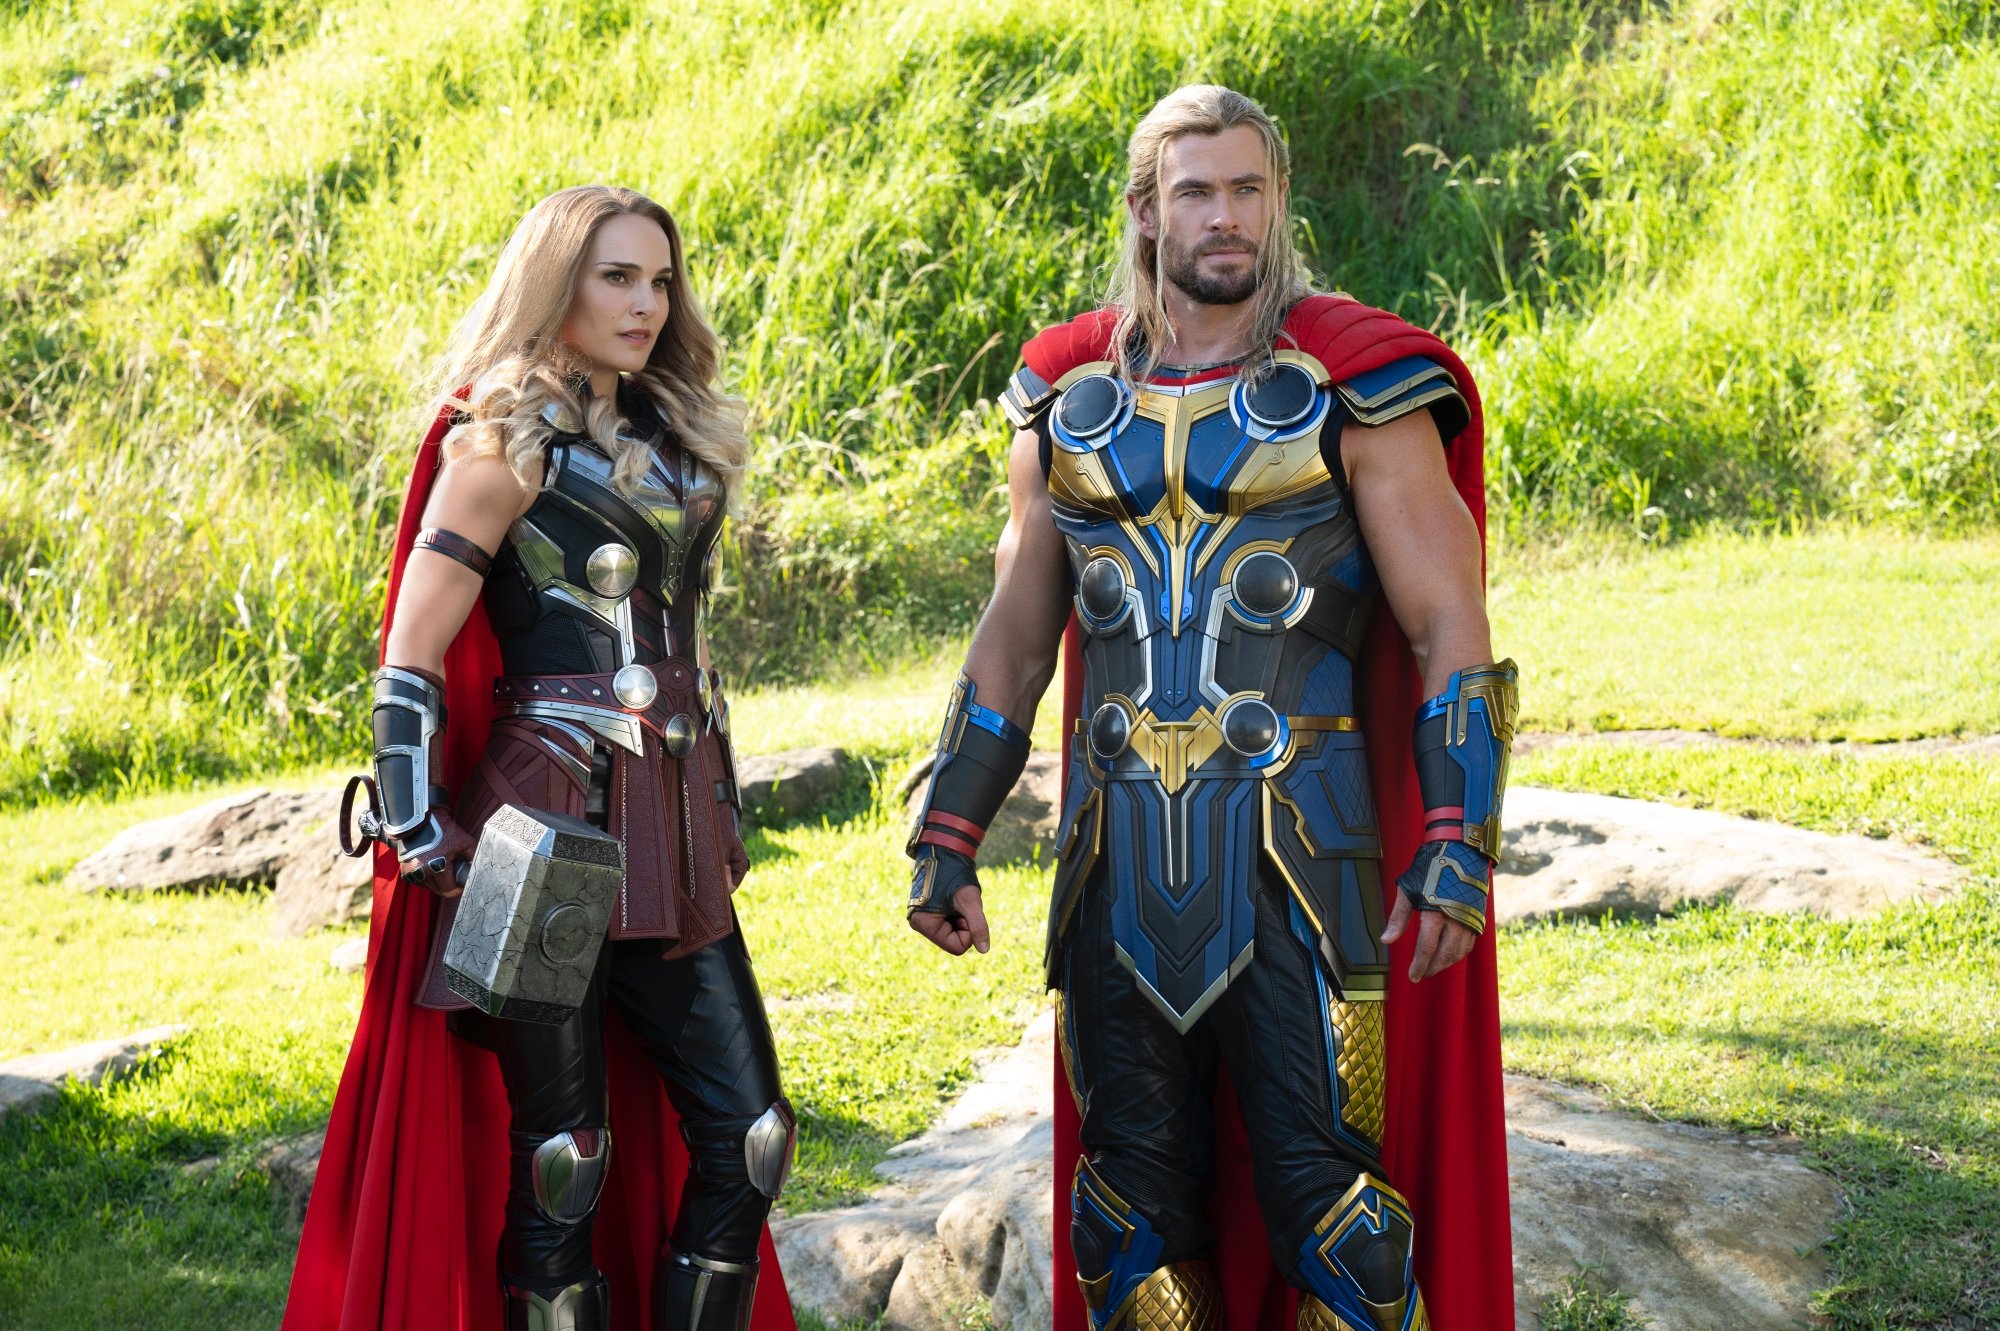 'Thor: Love and Thunder' Natalie Portman as Mighty Thor and Chris Hemsworth as Thor standing next to each other in their costumes in front of grassy hill